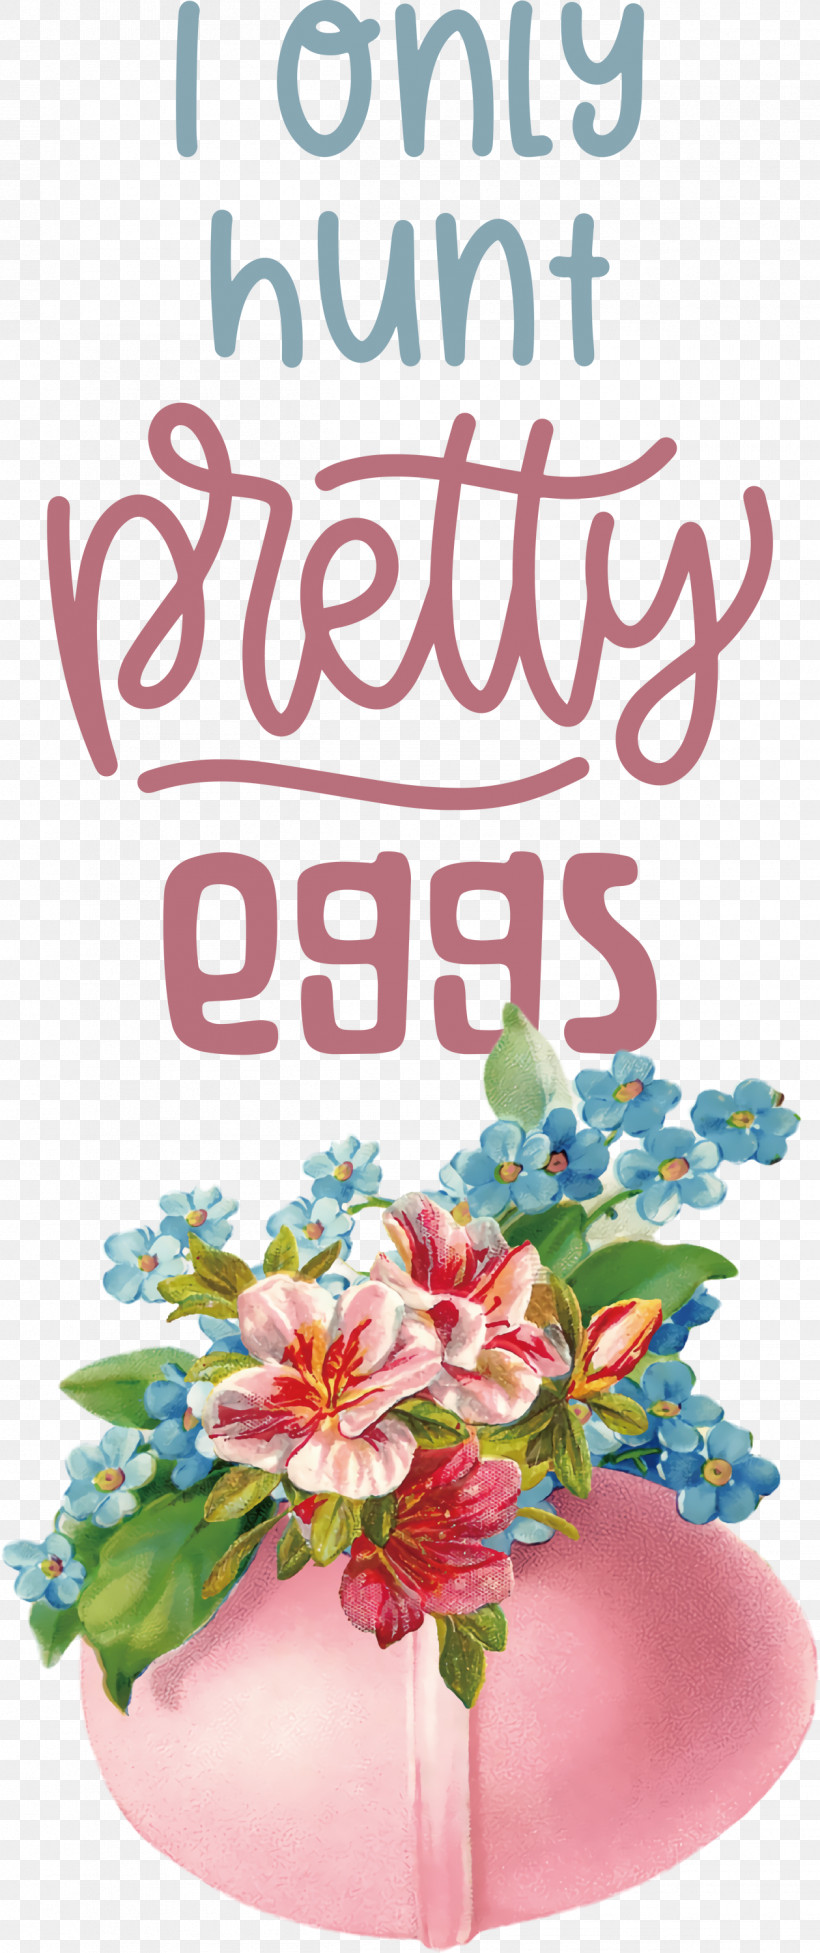 Hunt Pretty Eggs Egg Easter Day, PNG, 1259x3000px, Egg, Cut Flowers, Drawing, Easter Day, Floral Design Download Free